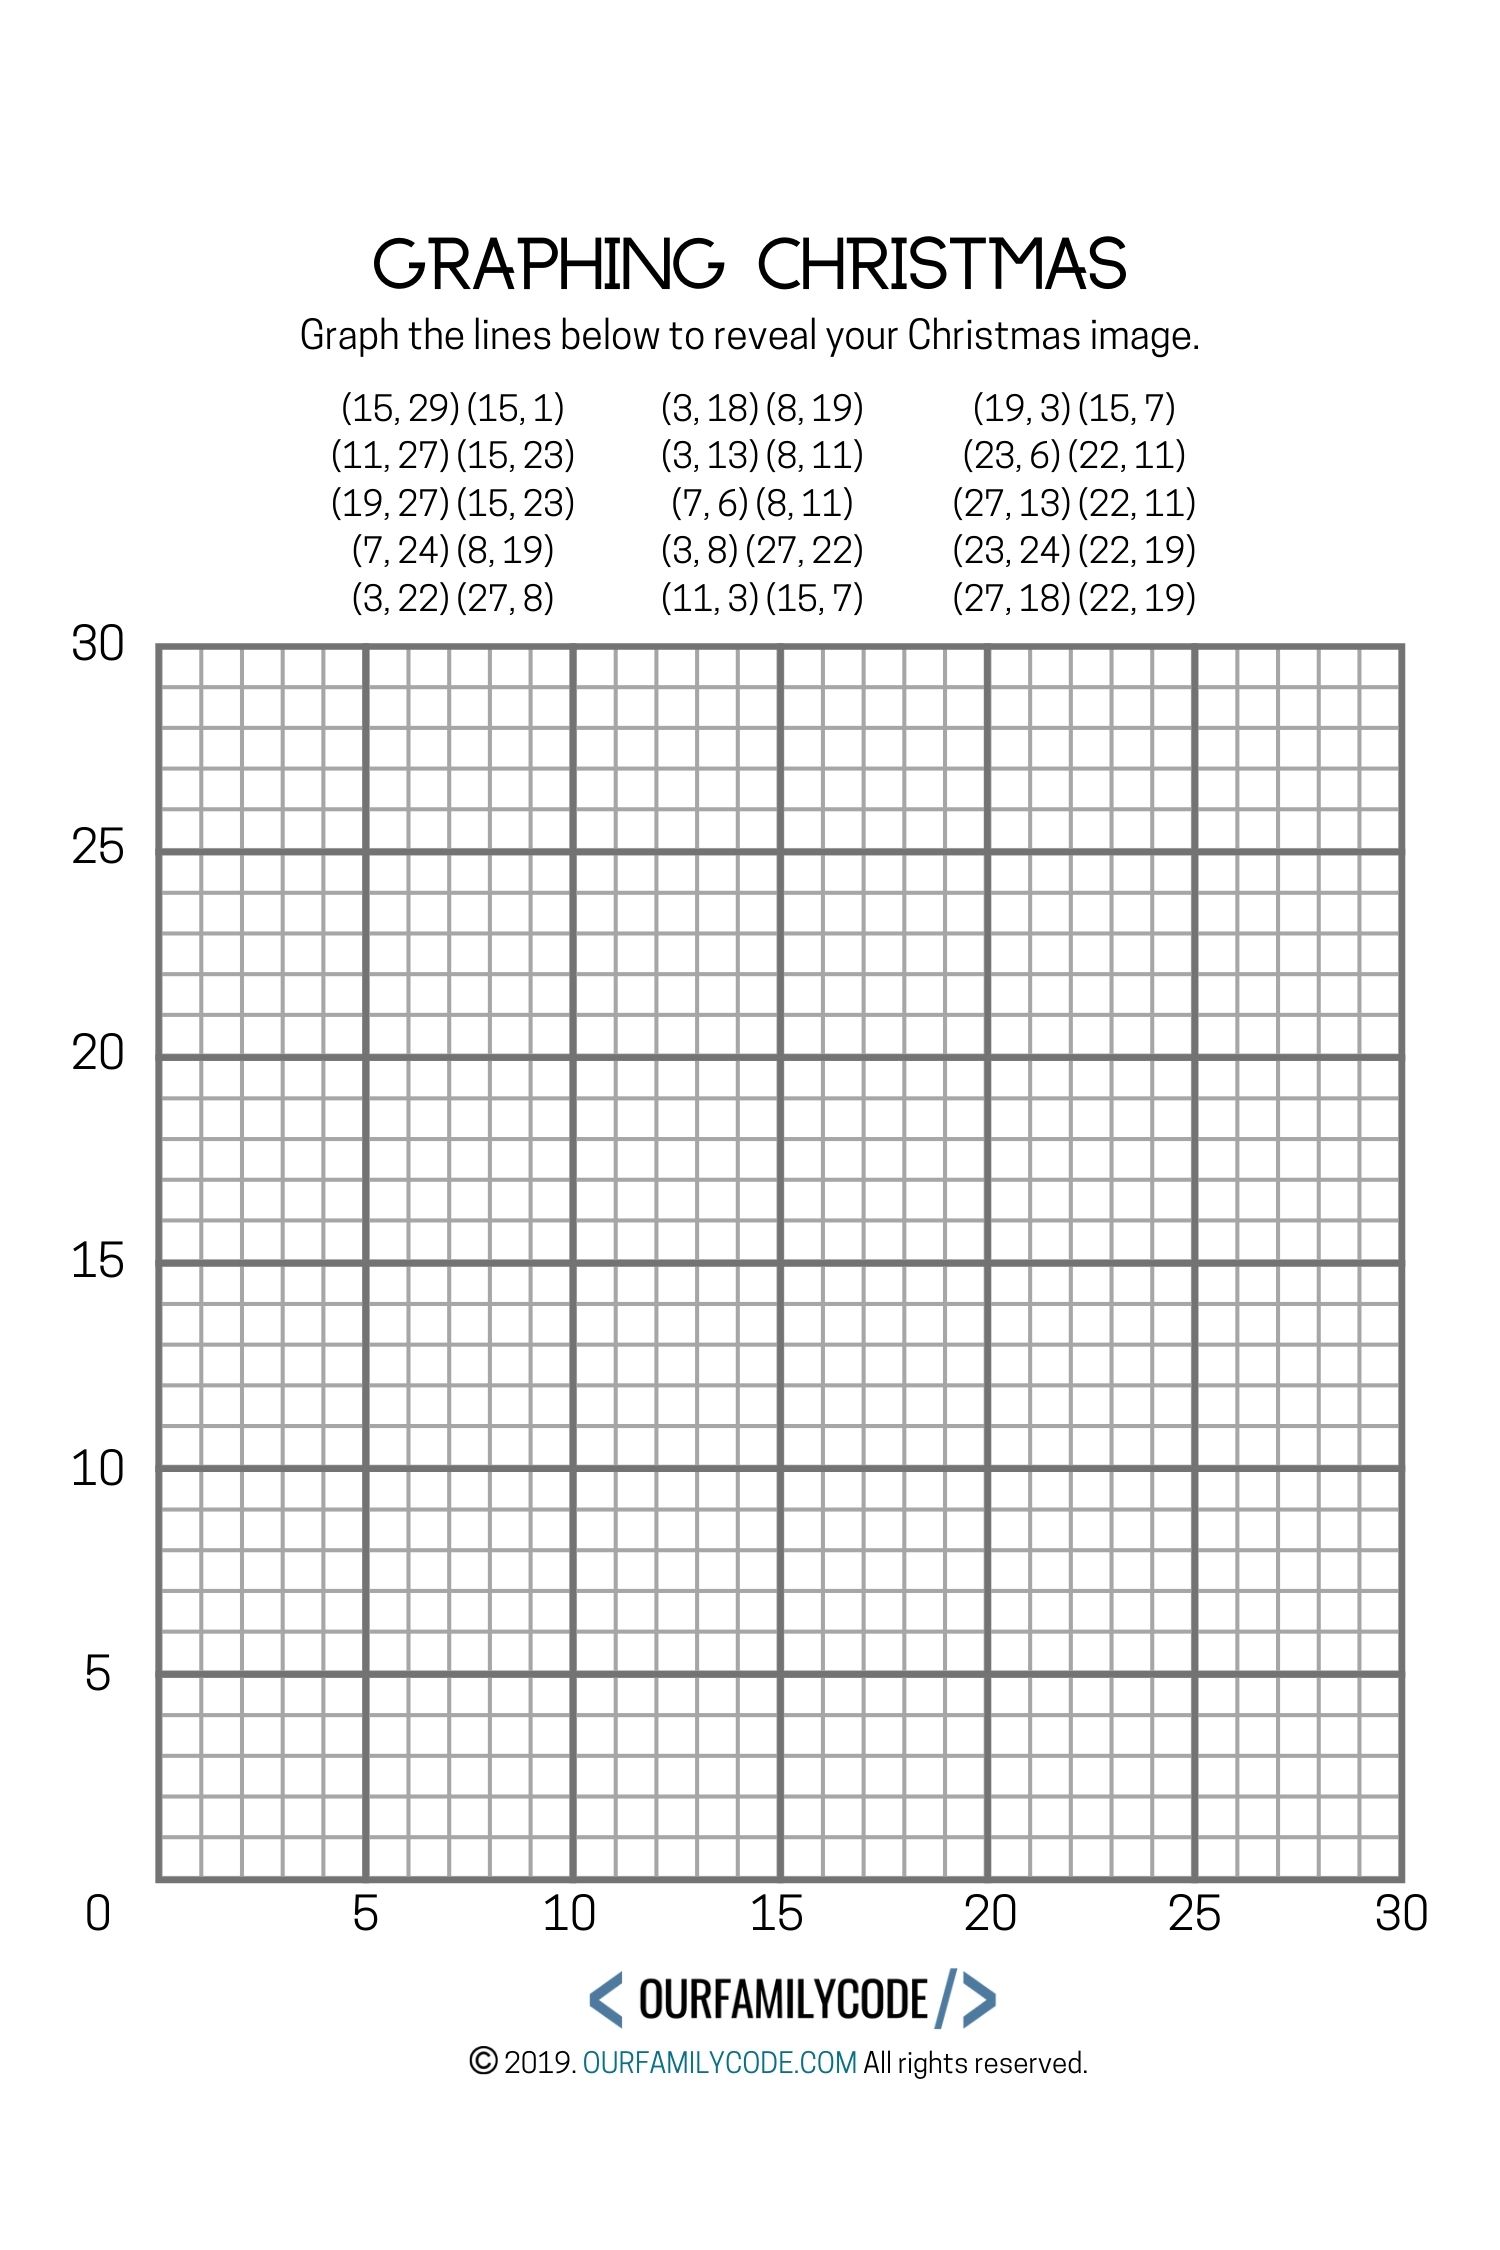 Christmas graphing geometry activity coordinate plane blank